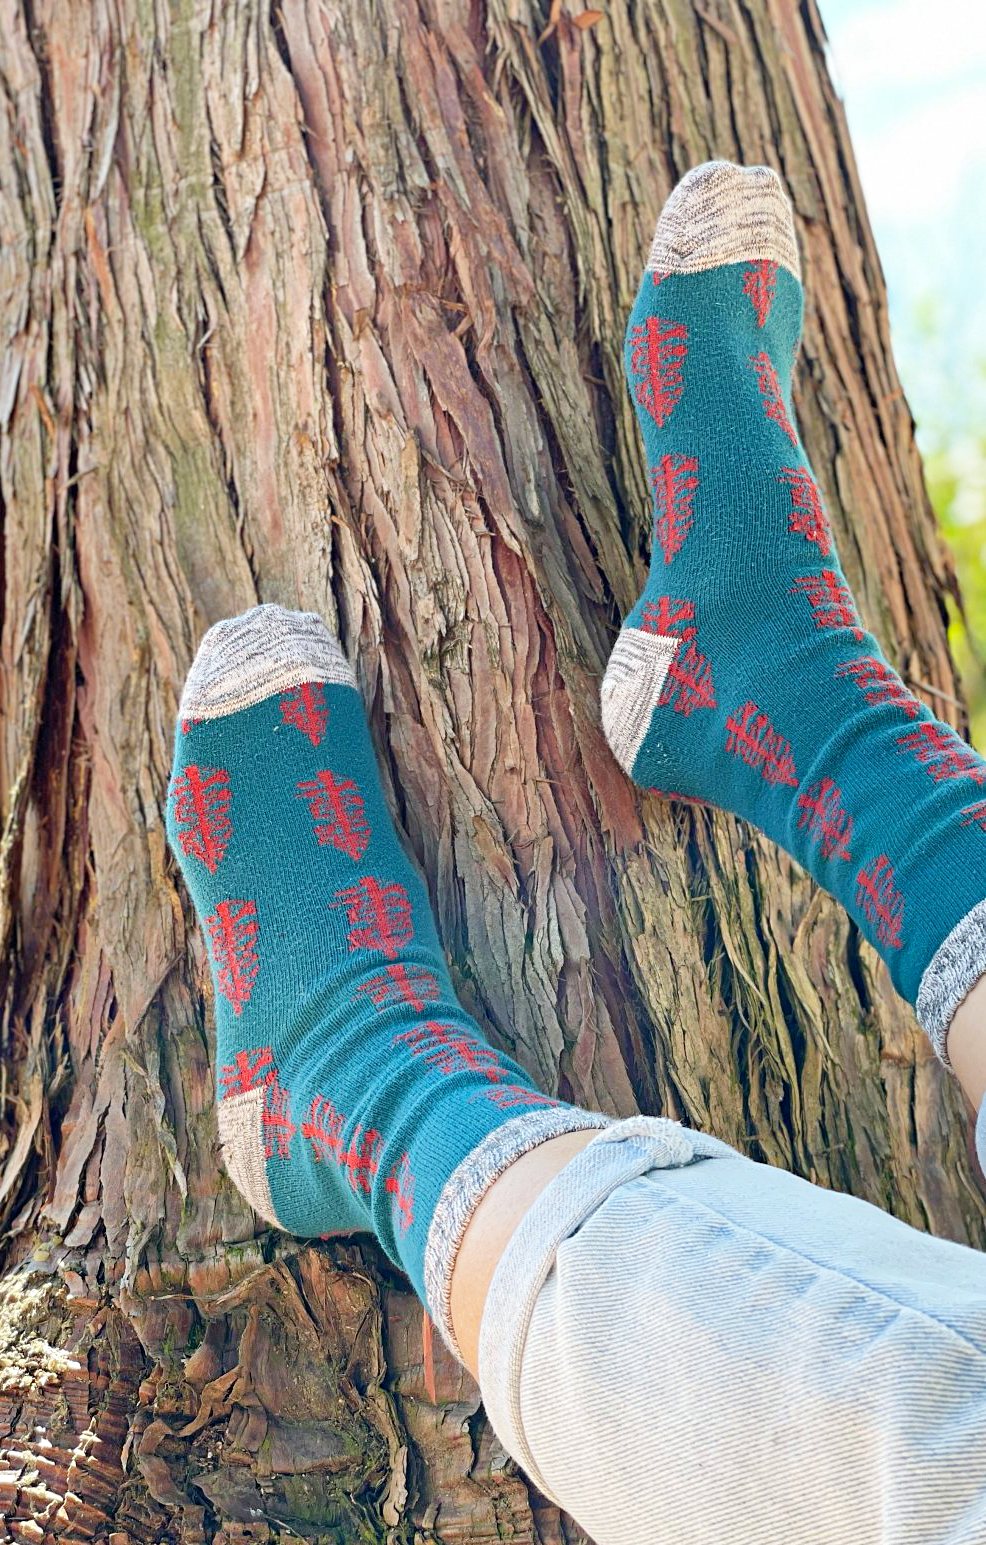 A woman is in the forest wearing TABBISOCKS brand Replant Pairs Tree Socks in Teal with Grey at the cuff and toe and a reddish brown tree design throughout the socks